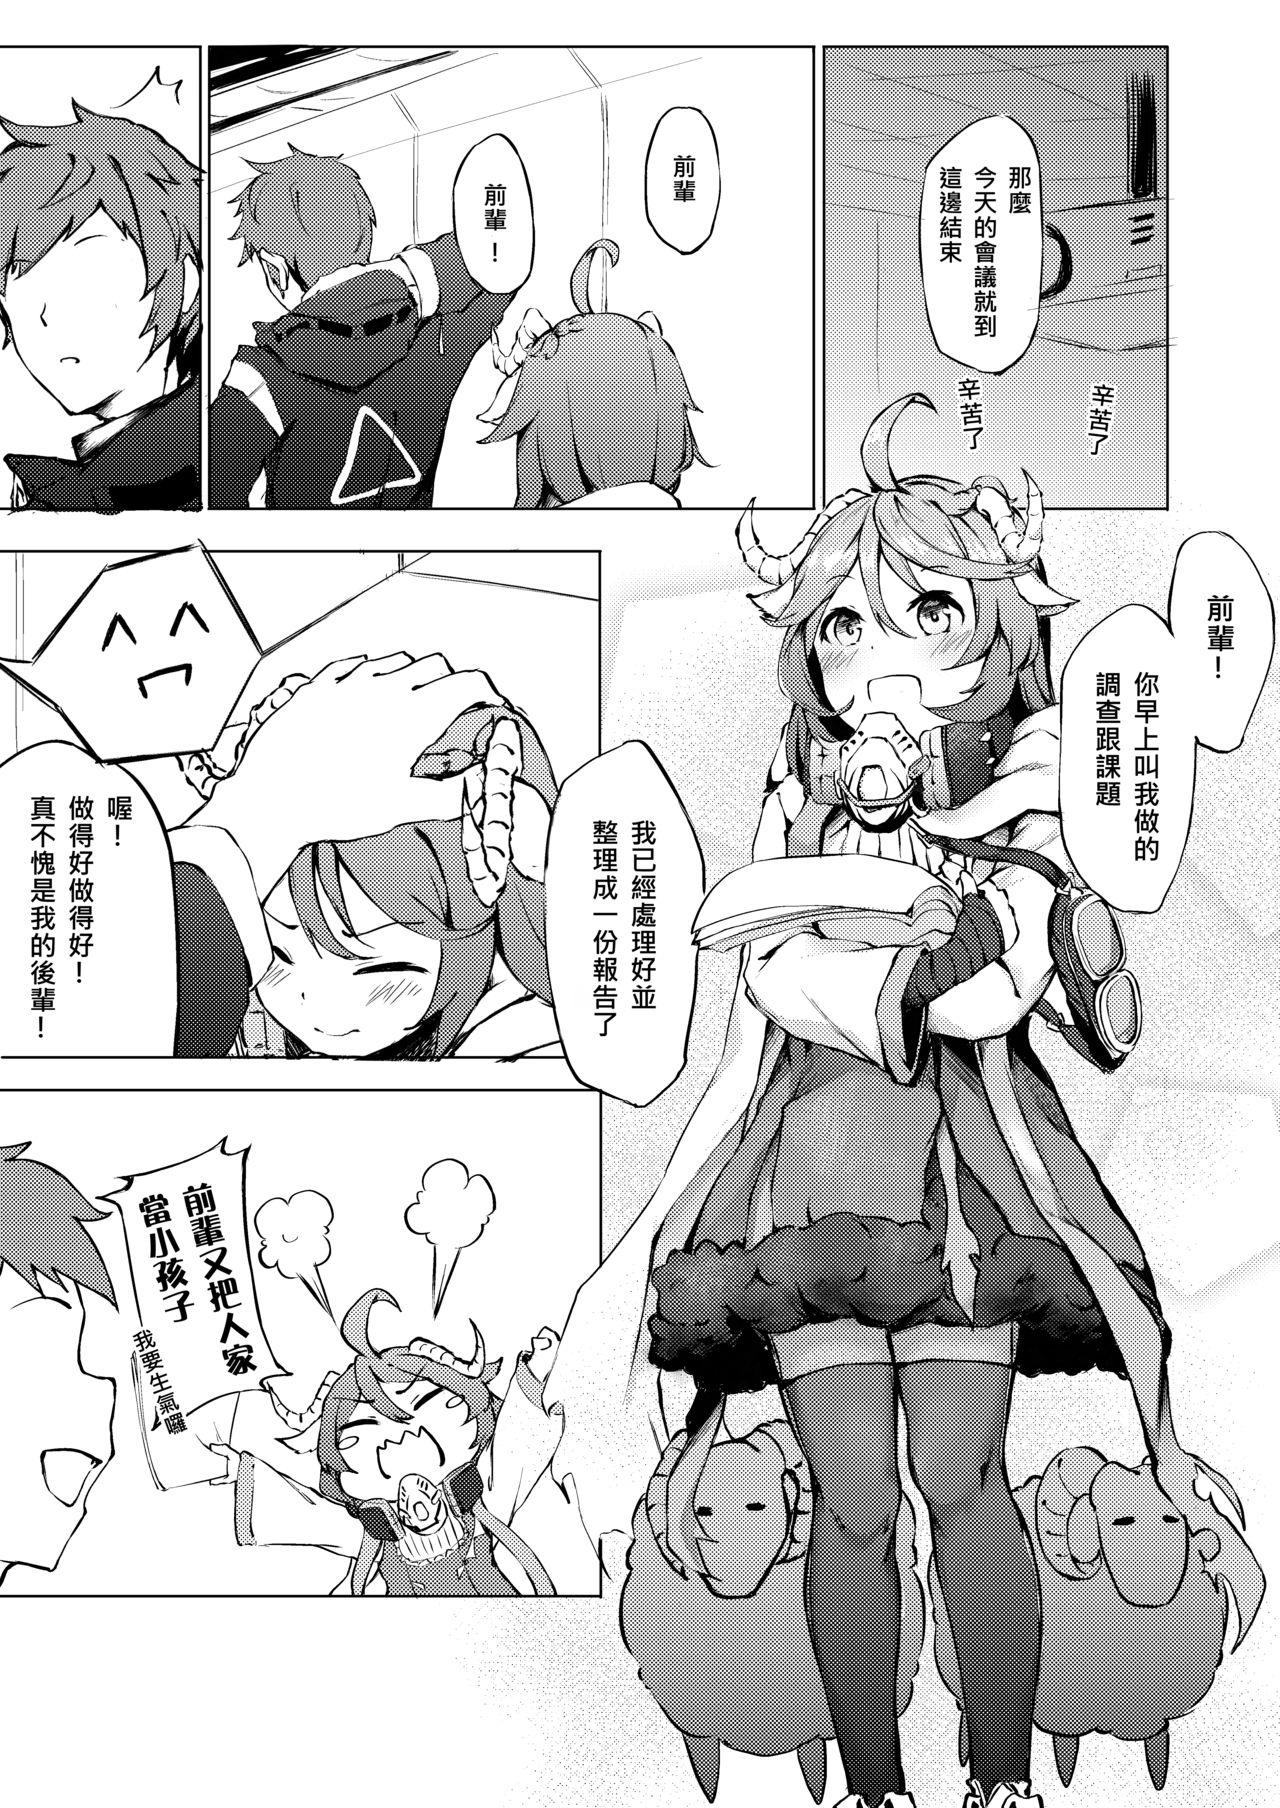 Amateur 不存在的聲音 | The Nonexistence Voice - Arknights Madura - Page 5